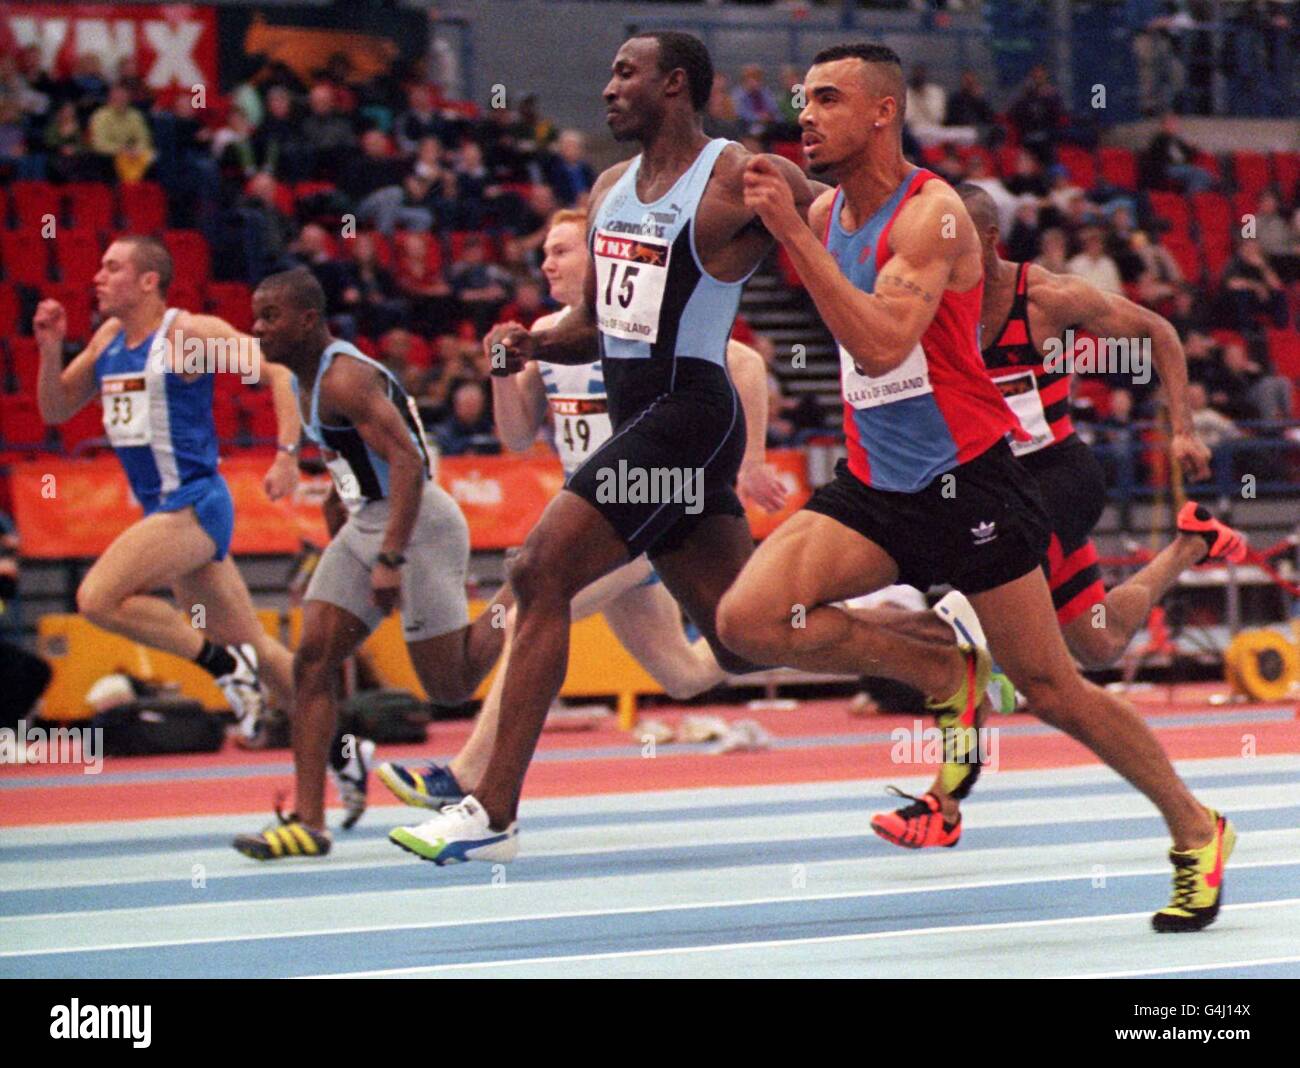 Linford Christie (No.15) is beaten into second place by eventual winner Raymond Salami (foreground right) at the 3'As indoor championship at the National Indoor Arena in Birmingham. Christie subsequently withdrew from the event with a hamstring injury. Stock Photo